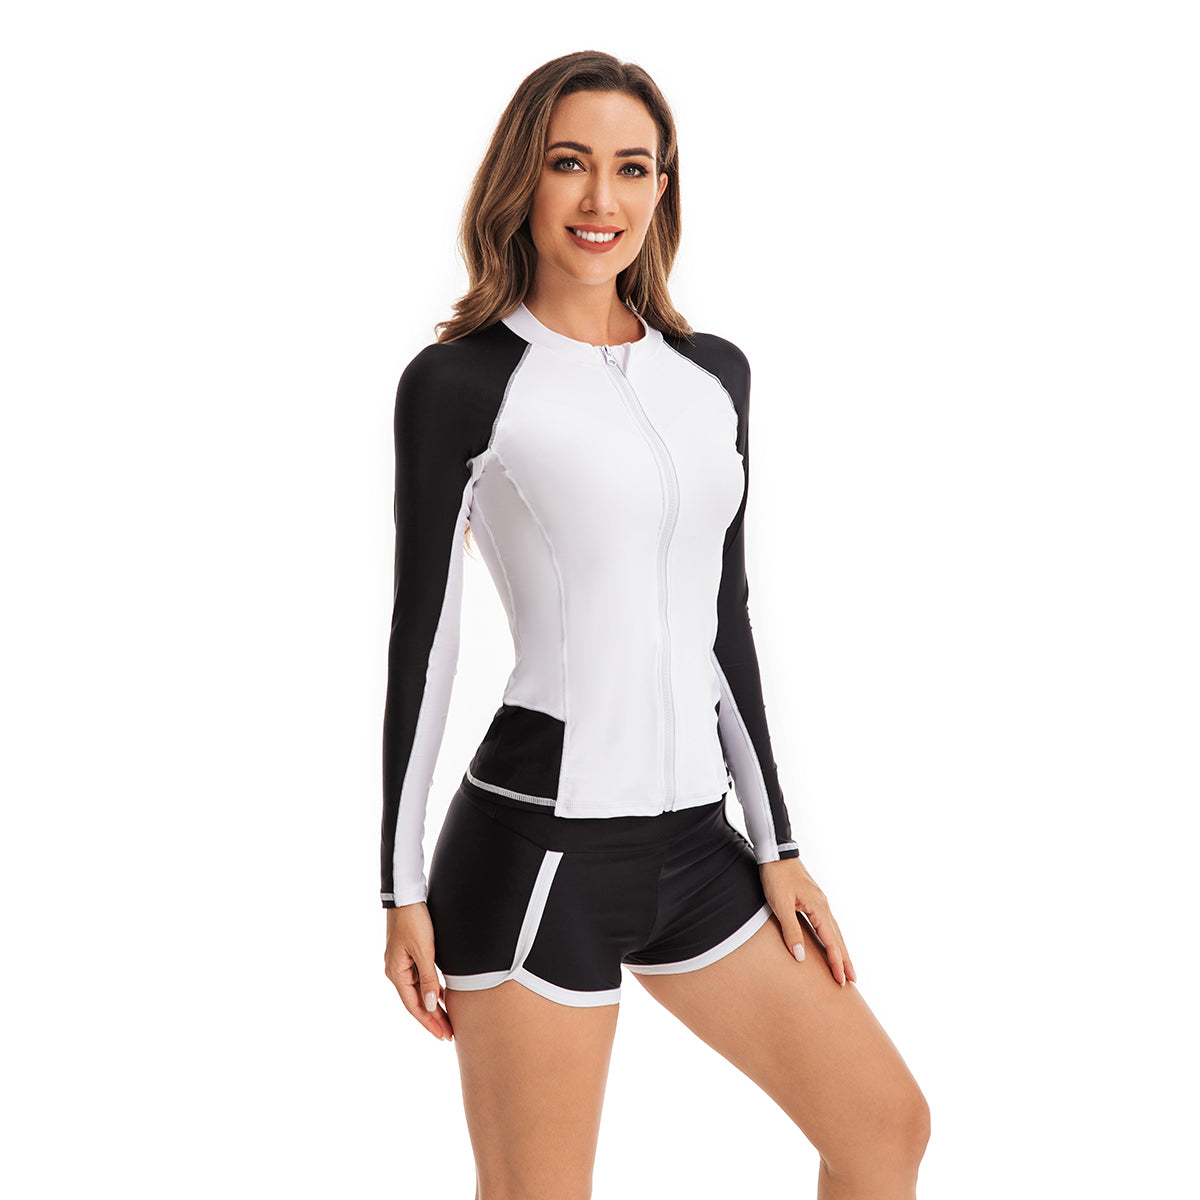 Black and White color Surfing Bathing Suit